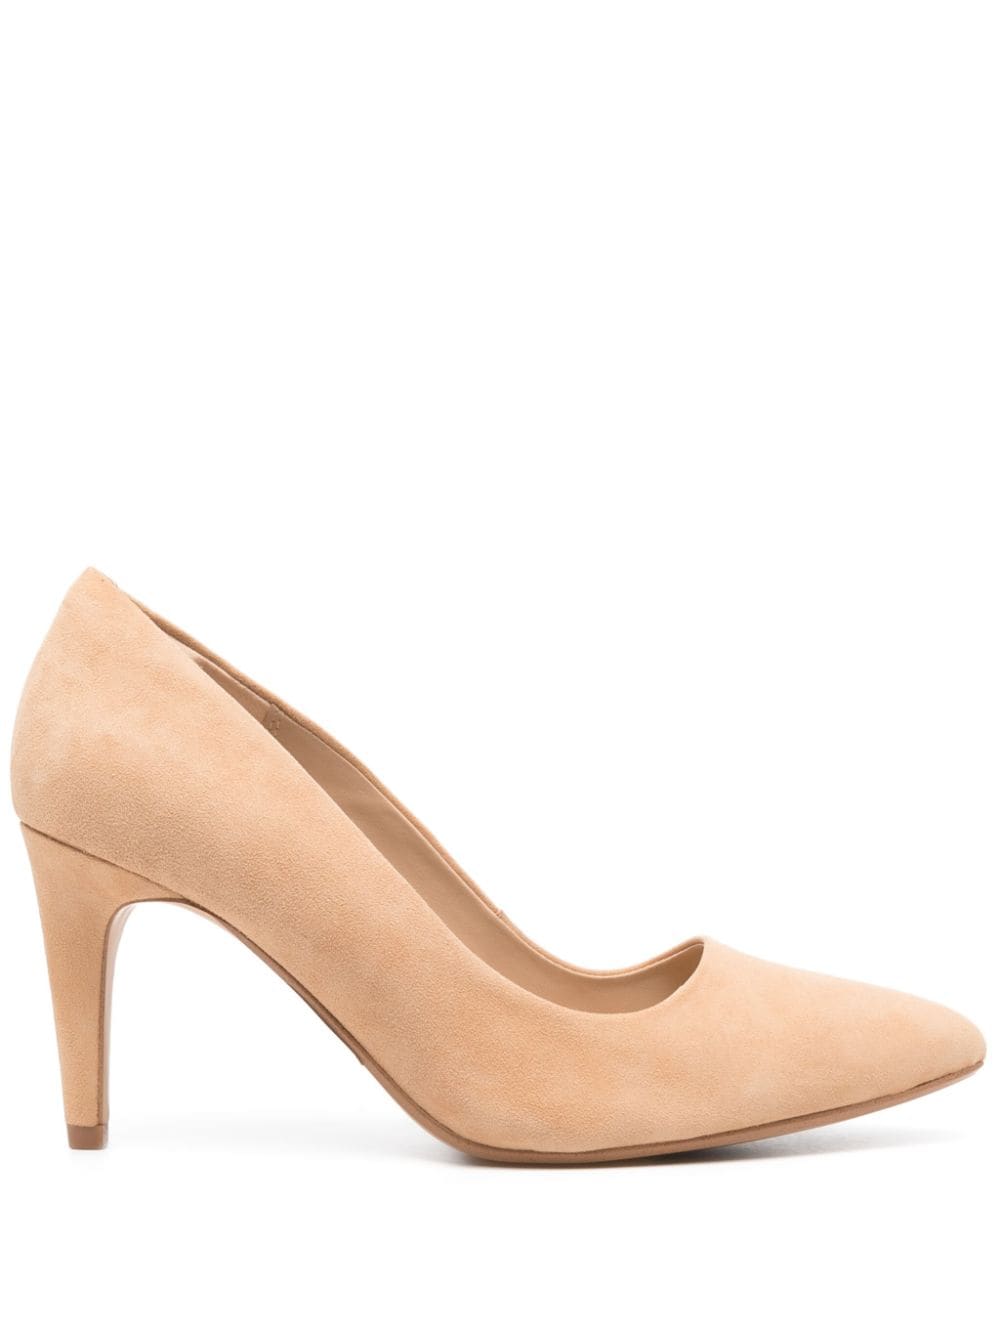 Clarks 75mm Laina Rae Suede Pumps In Neutrals